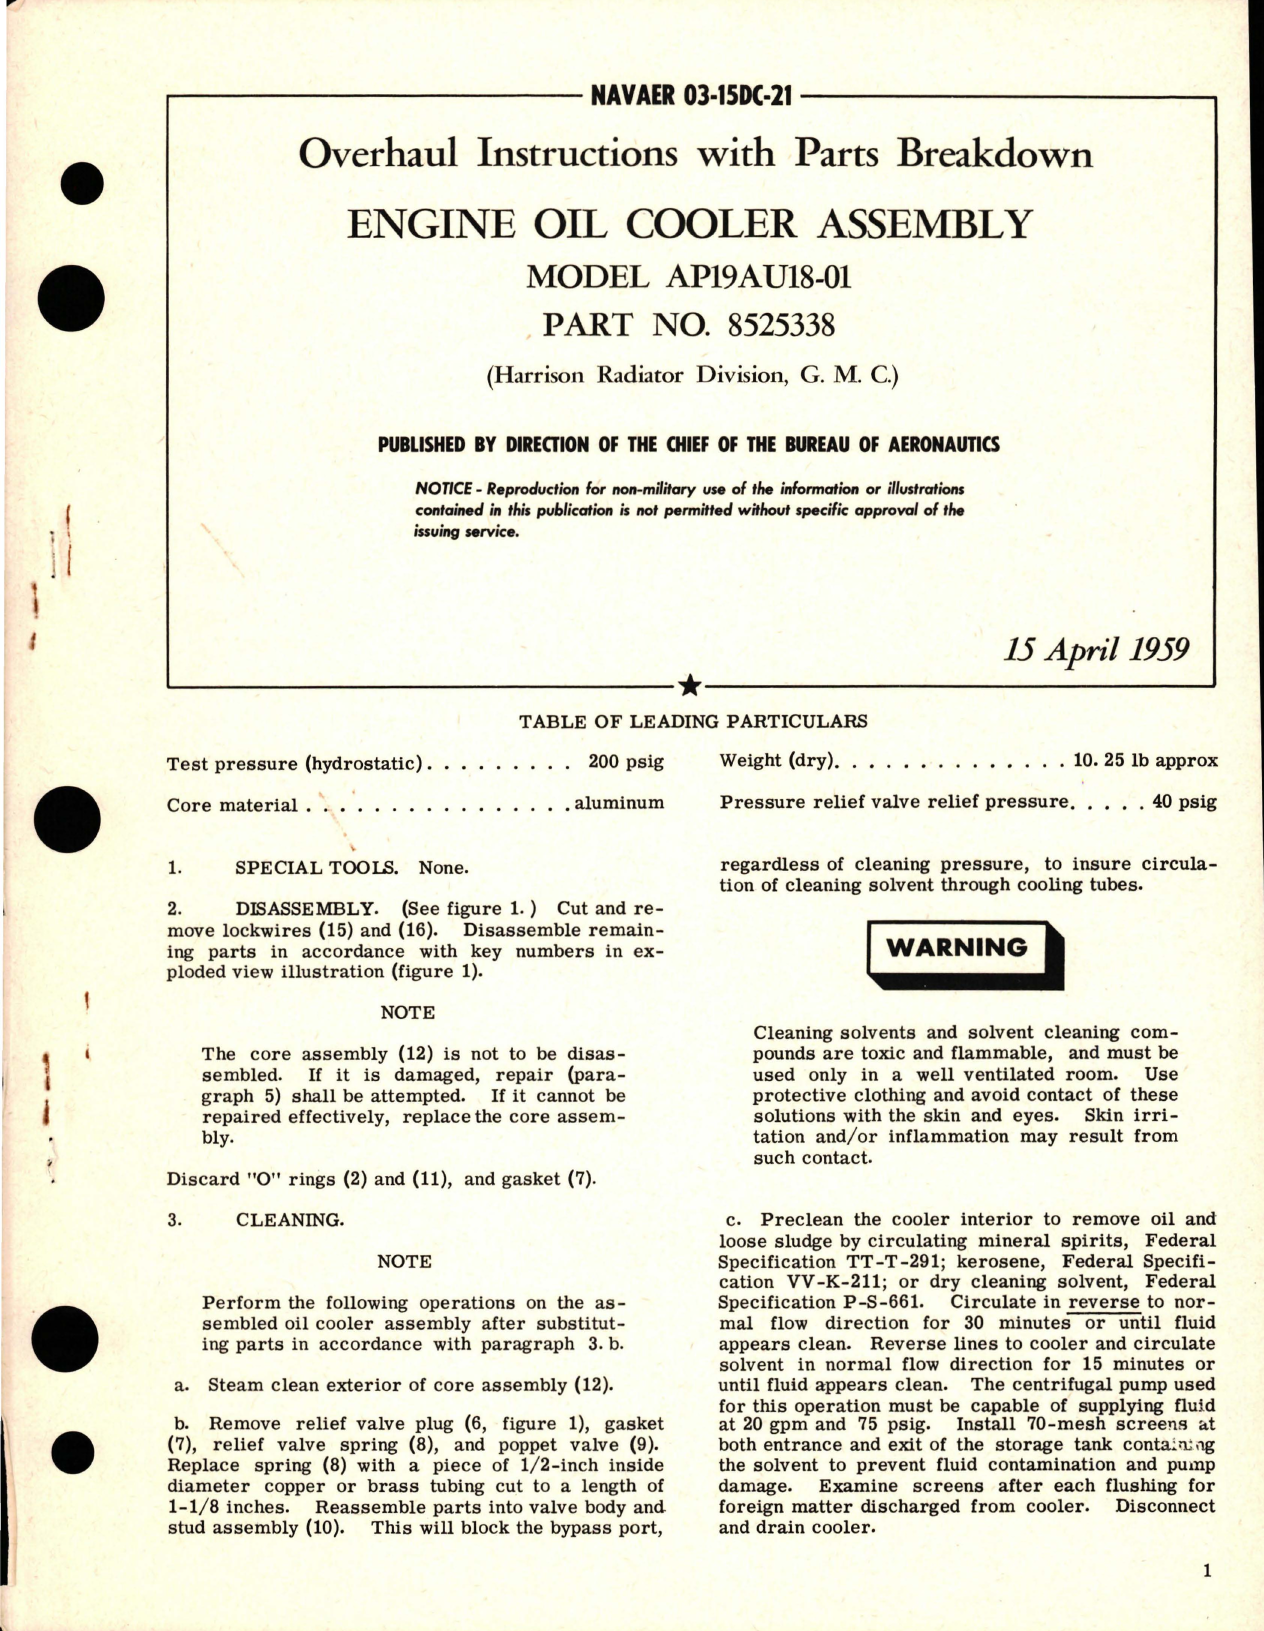 Sample page 1 from AirCorps Library document: Overhaul Instructions with Parts for Engine Oil Cooler Assembly - Model AP19AU18-01 - Part 8525338